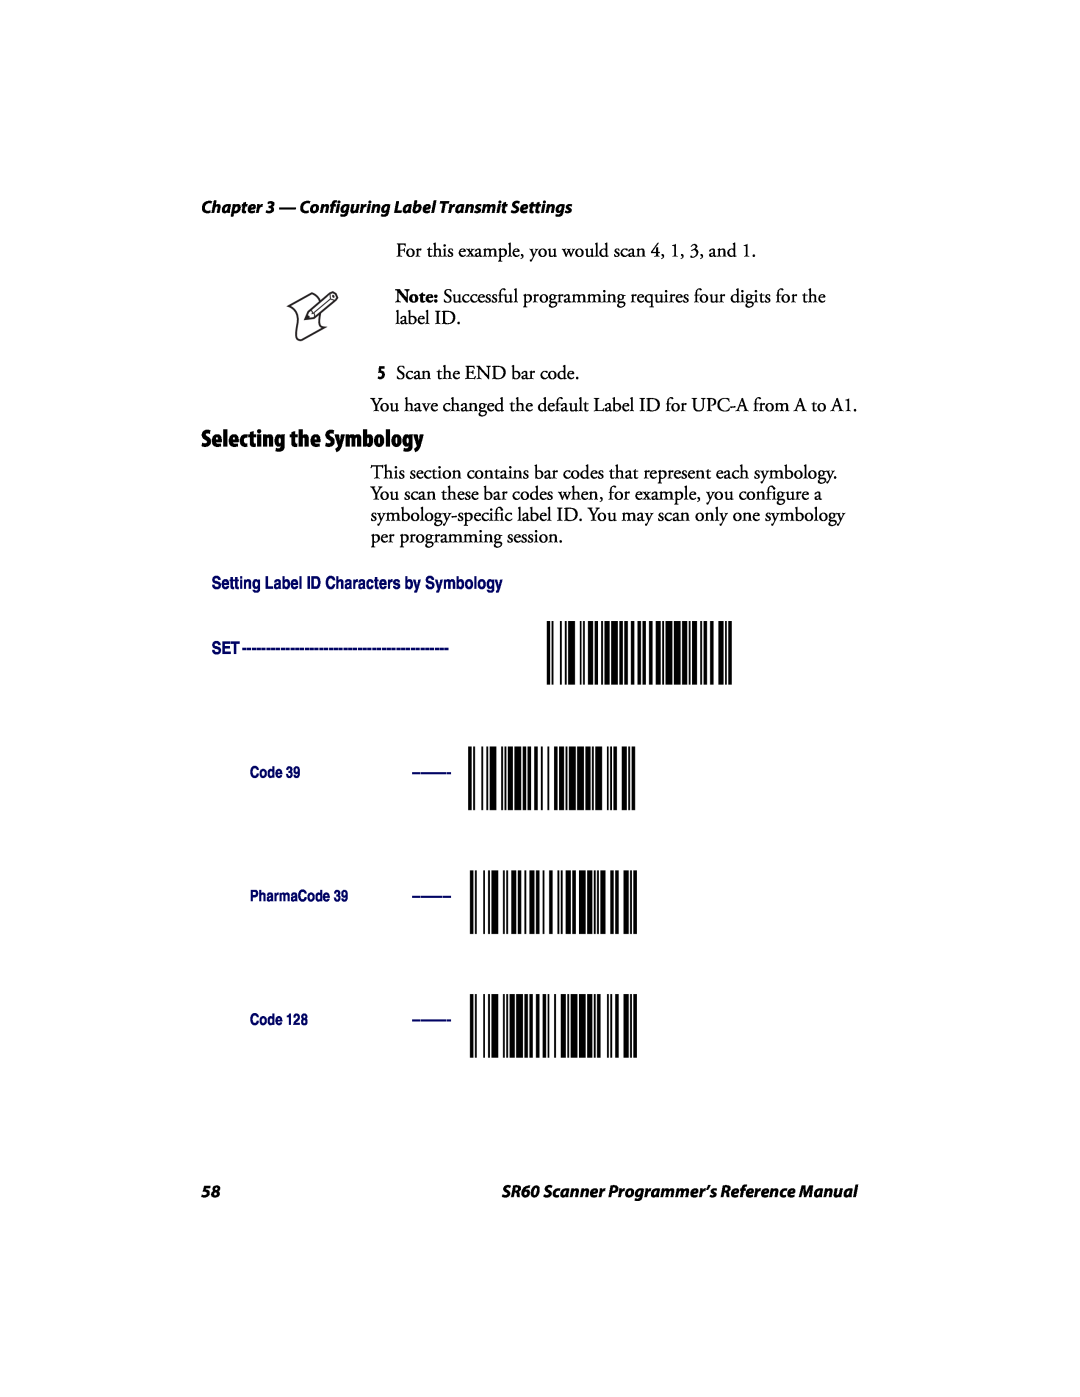 Intermec SR60 manual Selecting the Symbology, Setting Label ID Characters by Symbology SET 